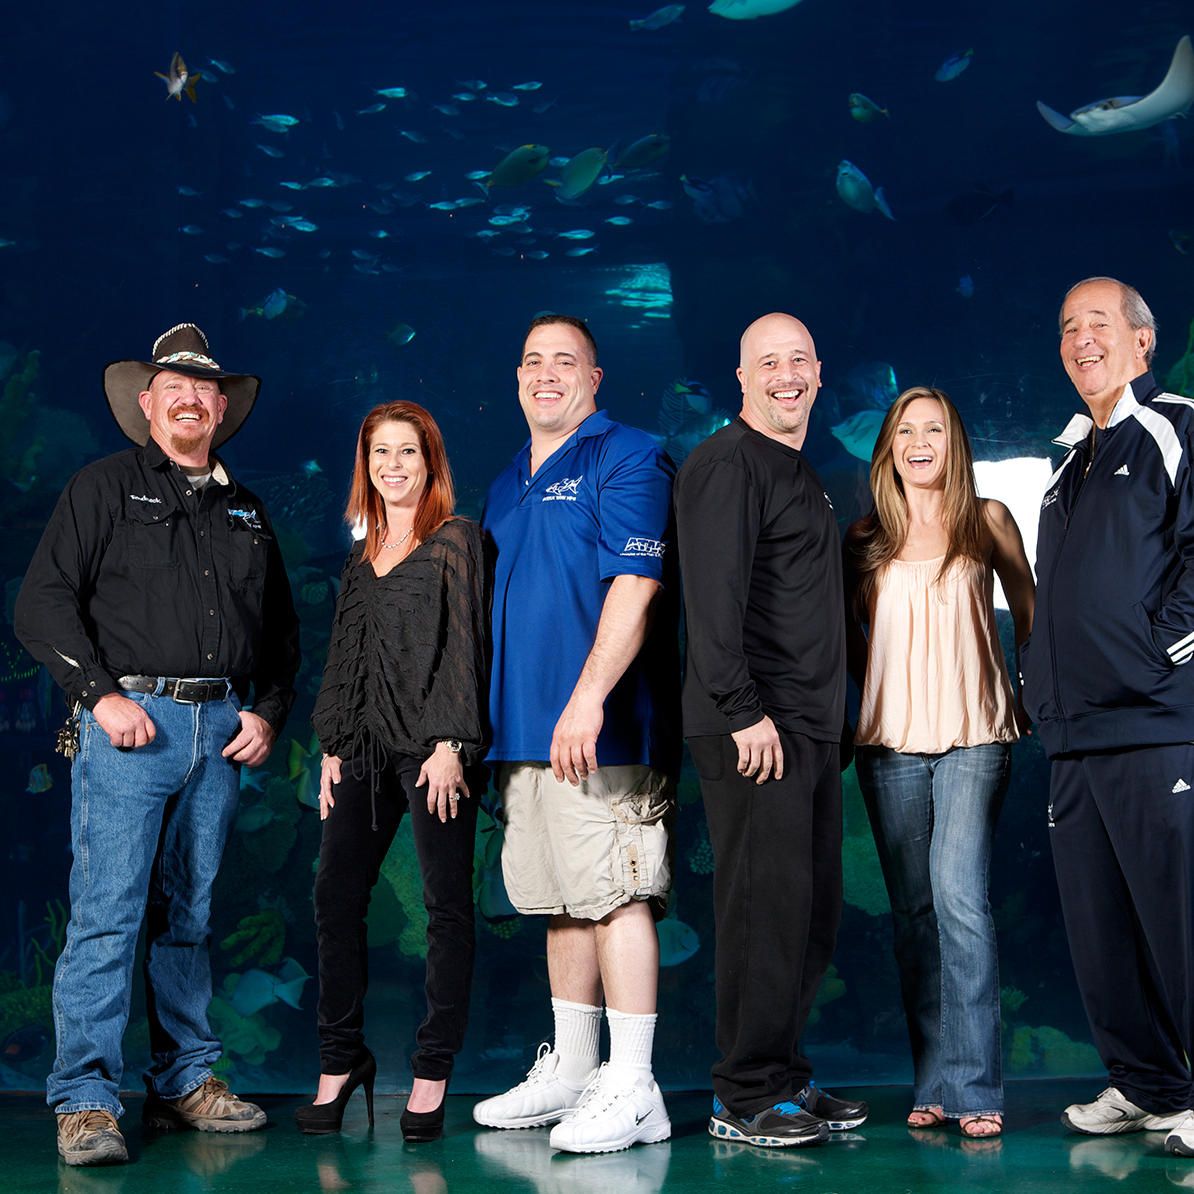 The very successful company installed fish tanks for many celebrities inclu...